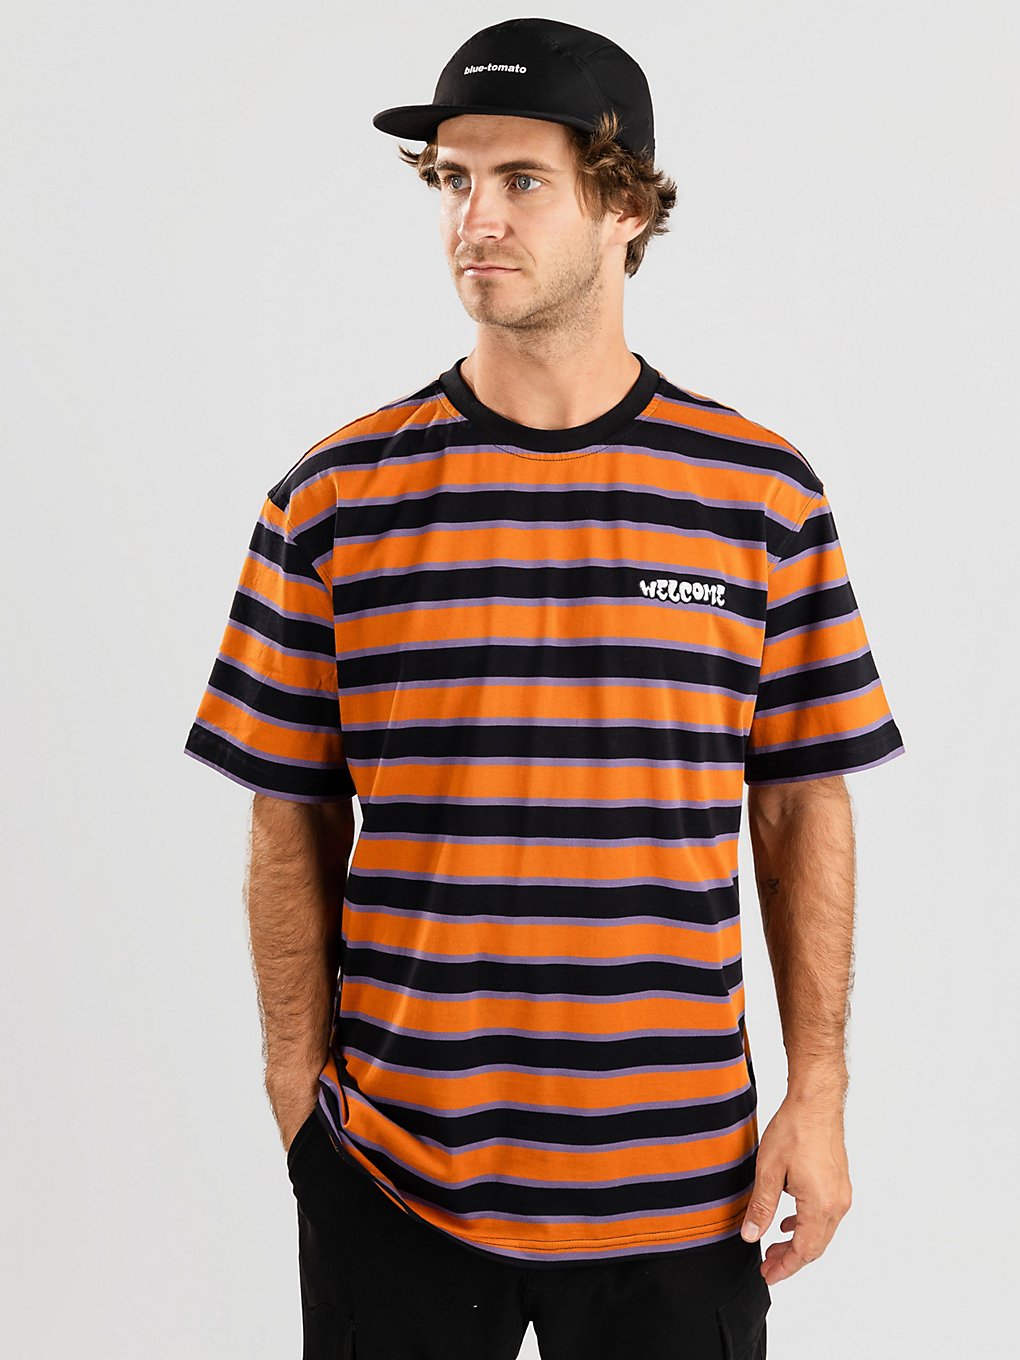 Welcome Cooper Striped T-Shirt patroon